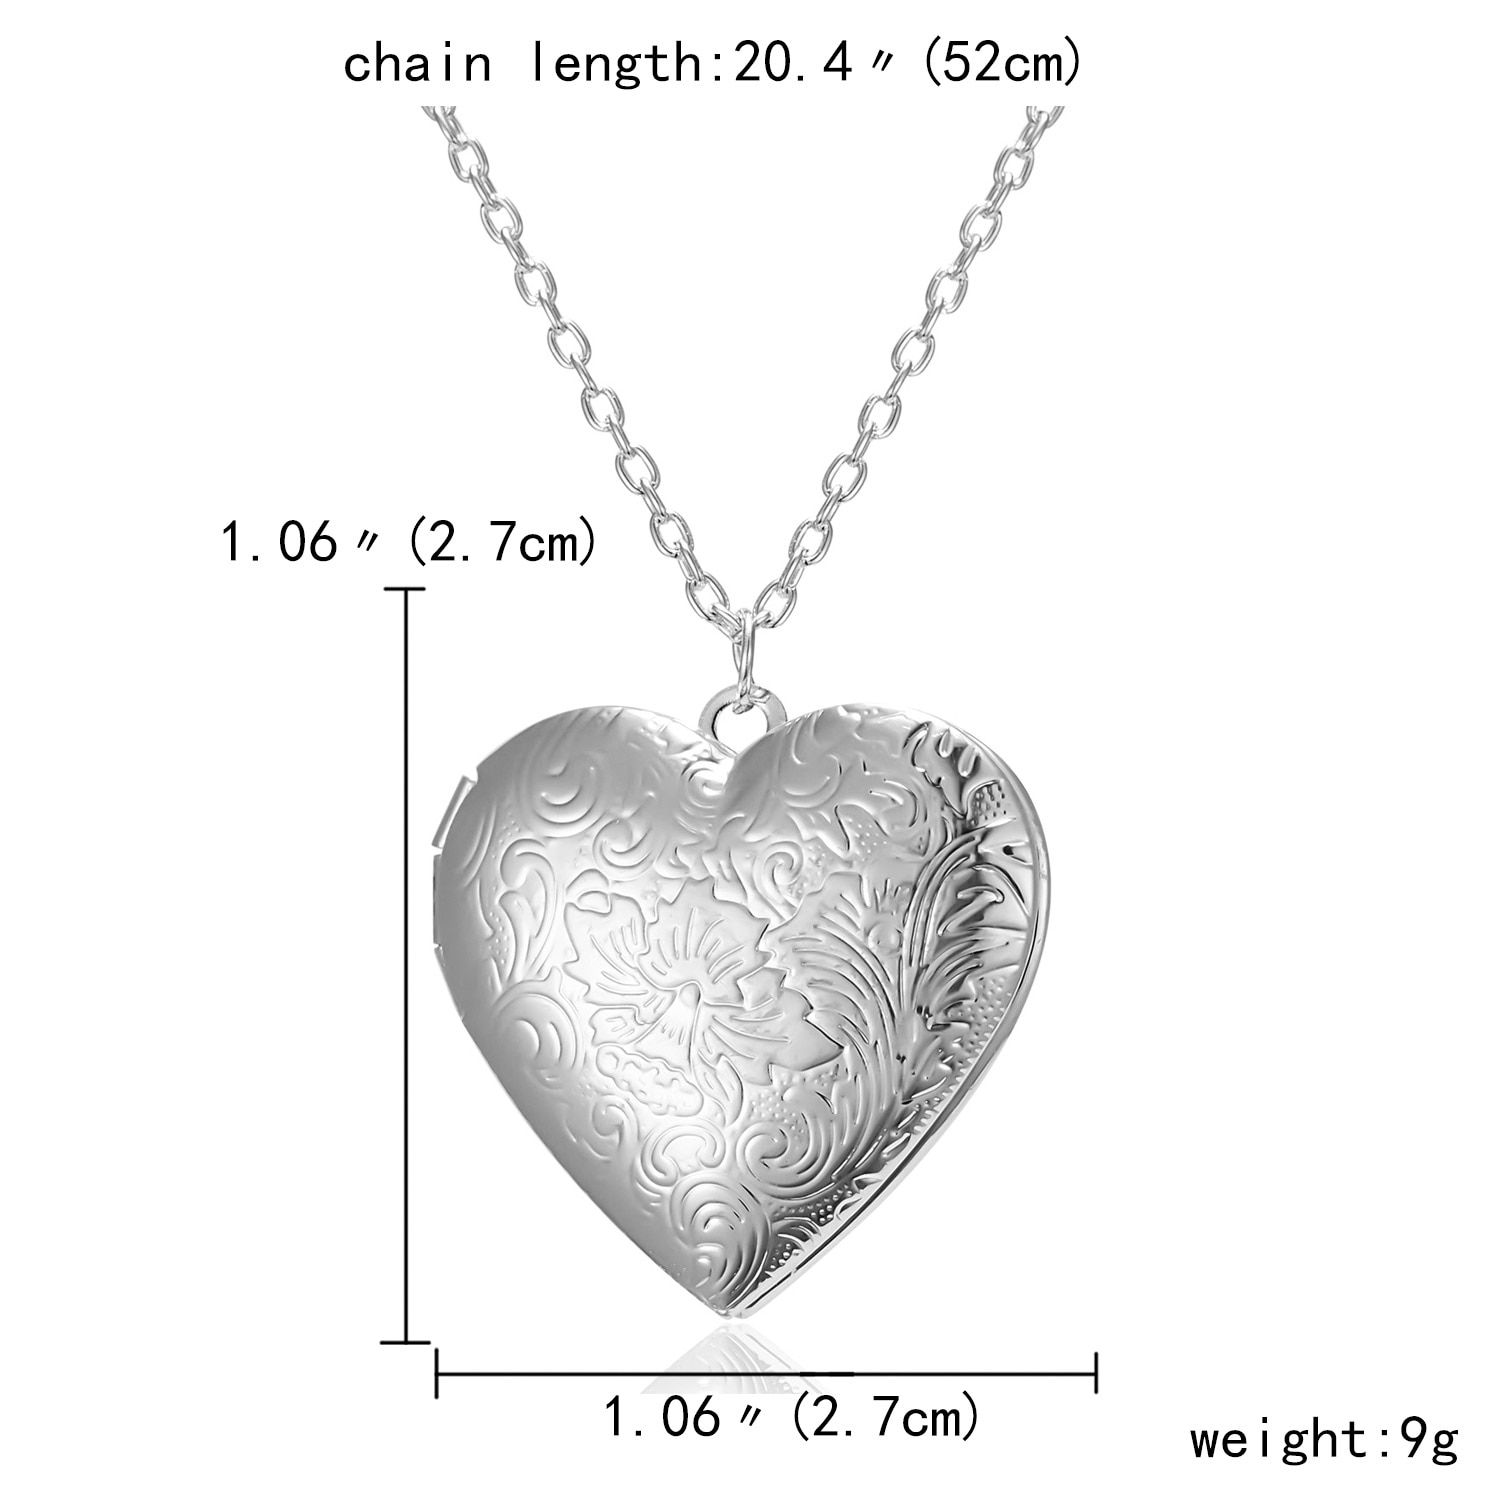 shop with crypto buy Unique Carved Design Heart shaped Photo Frame Pendant Necklace Charm Openable Locket Necklaces Women Men Memorial Jewelry pay with bitcoin